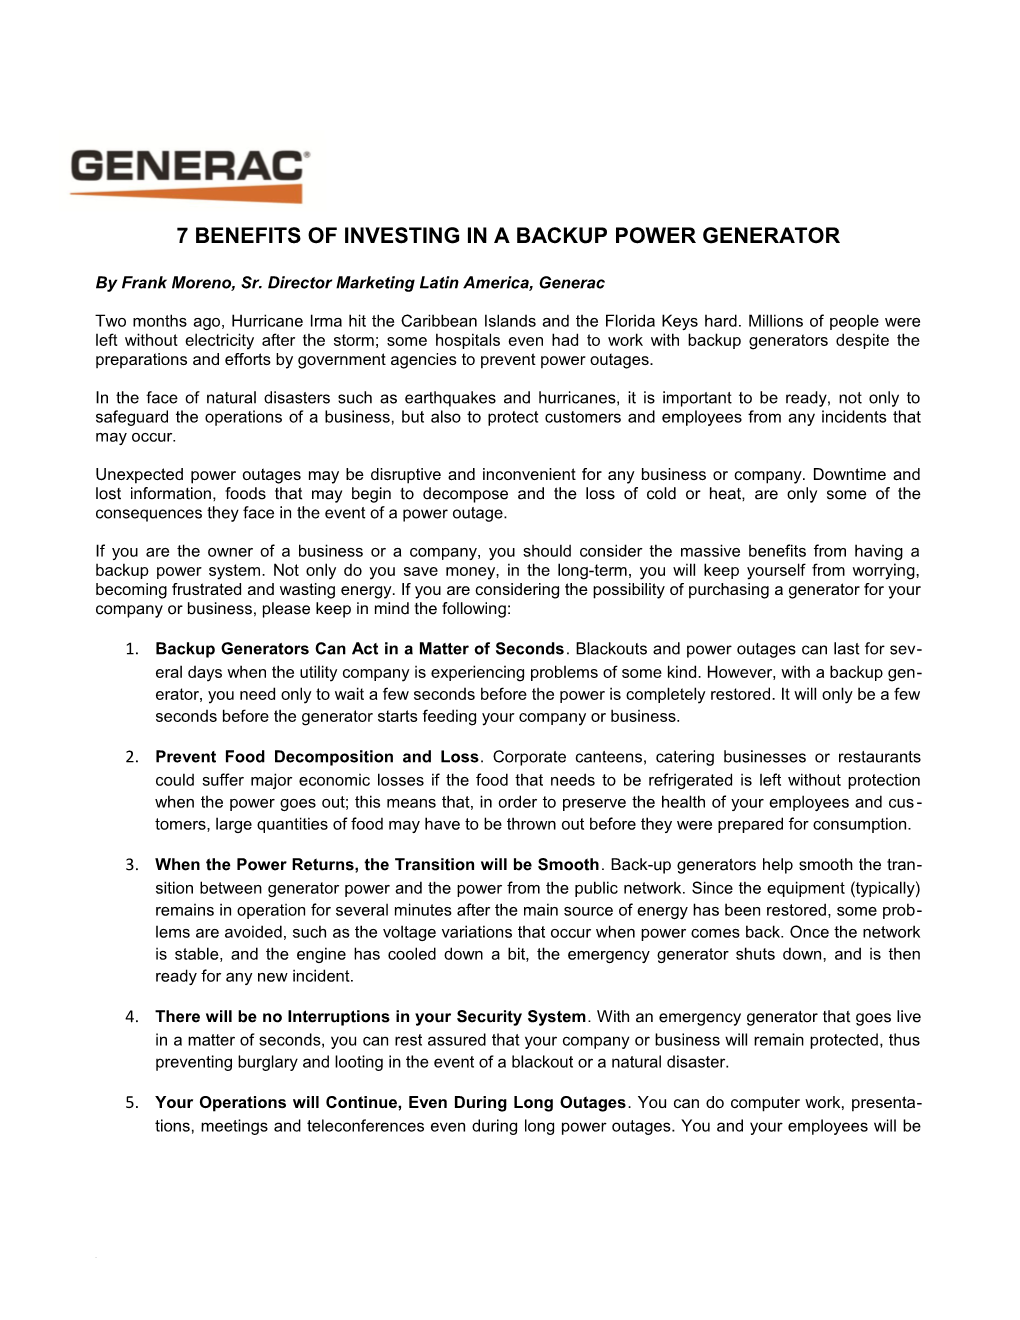 7 Benefits of Investing in a Backup Power Generator